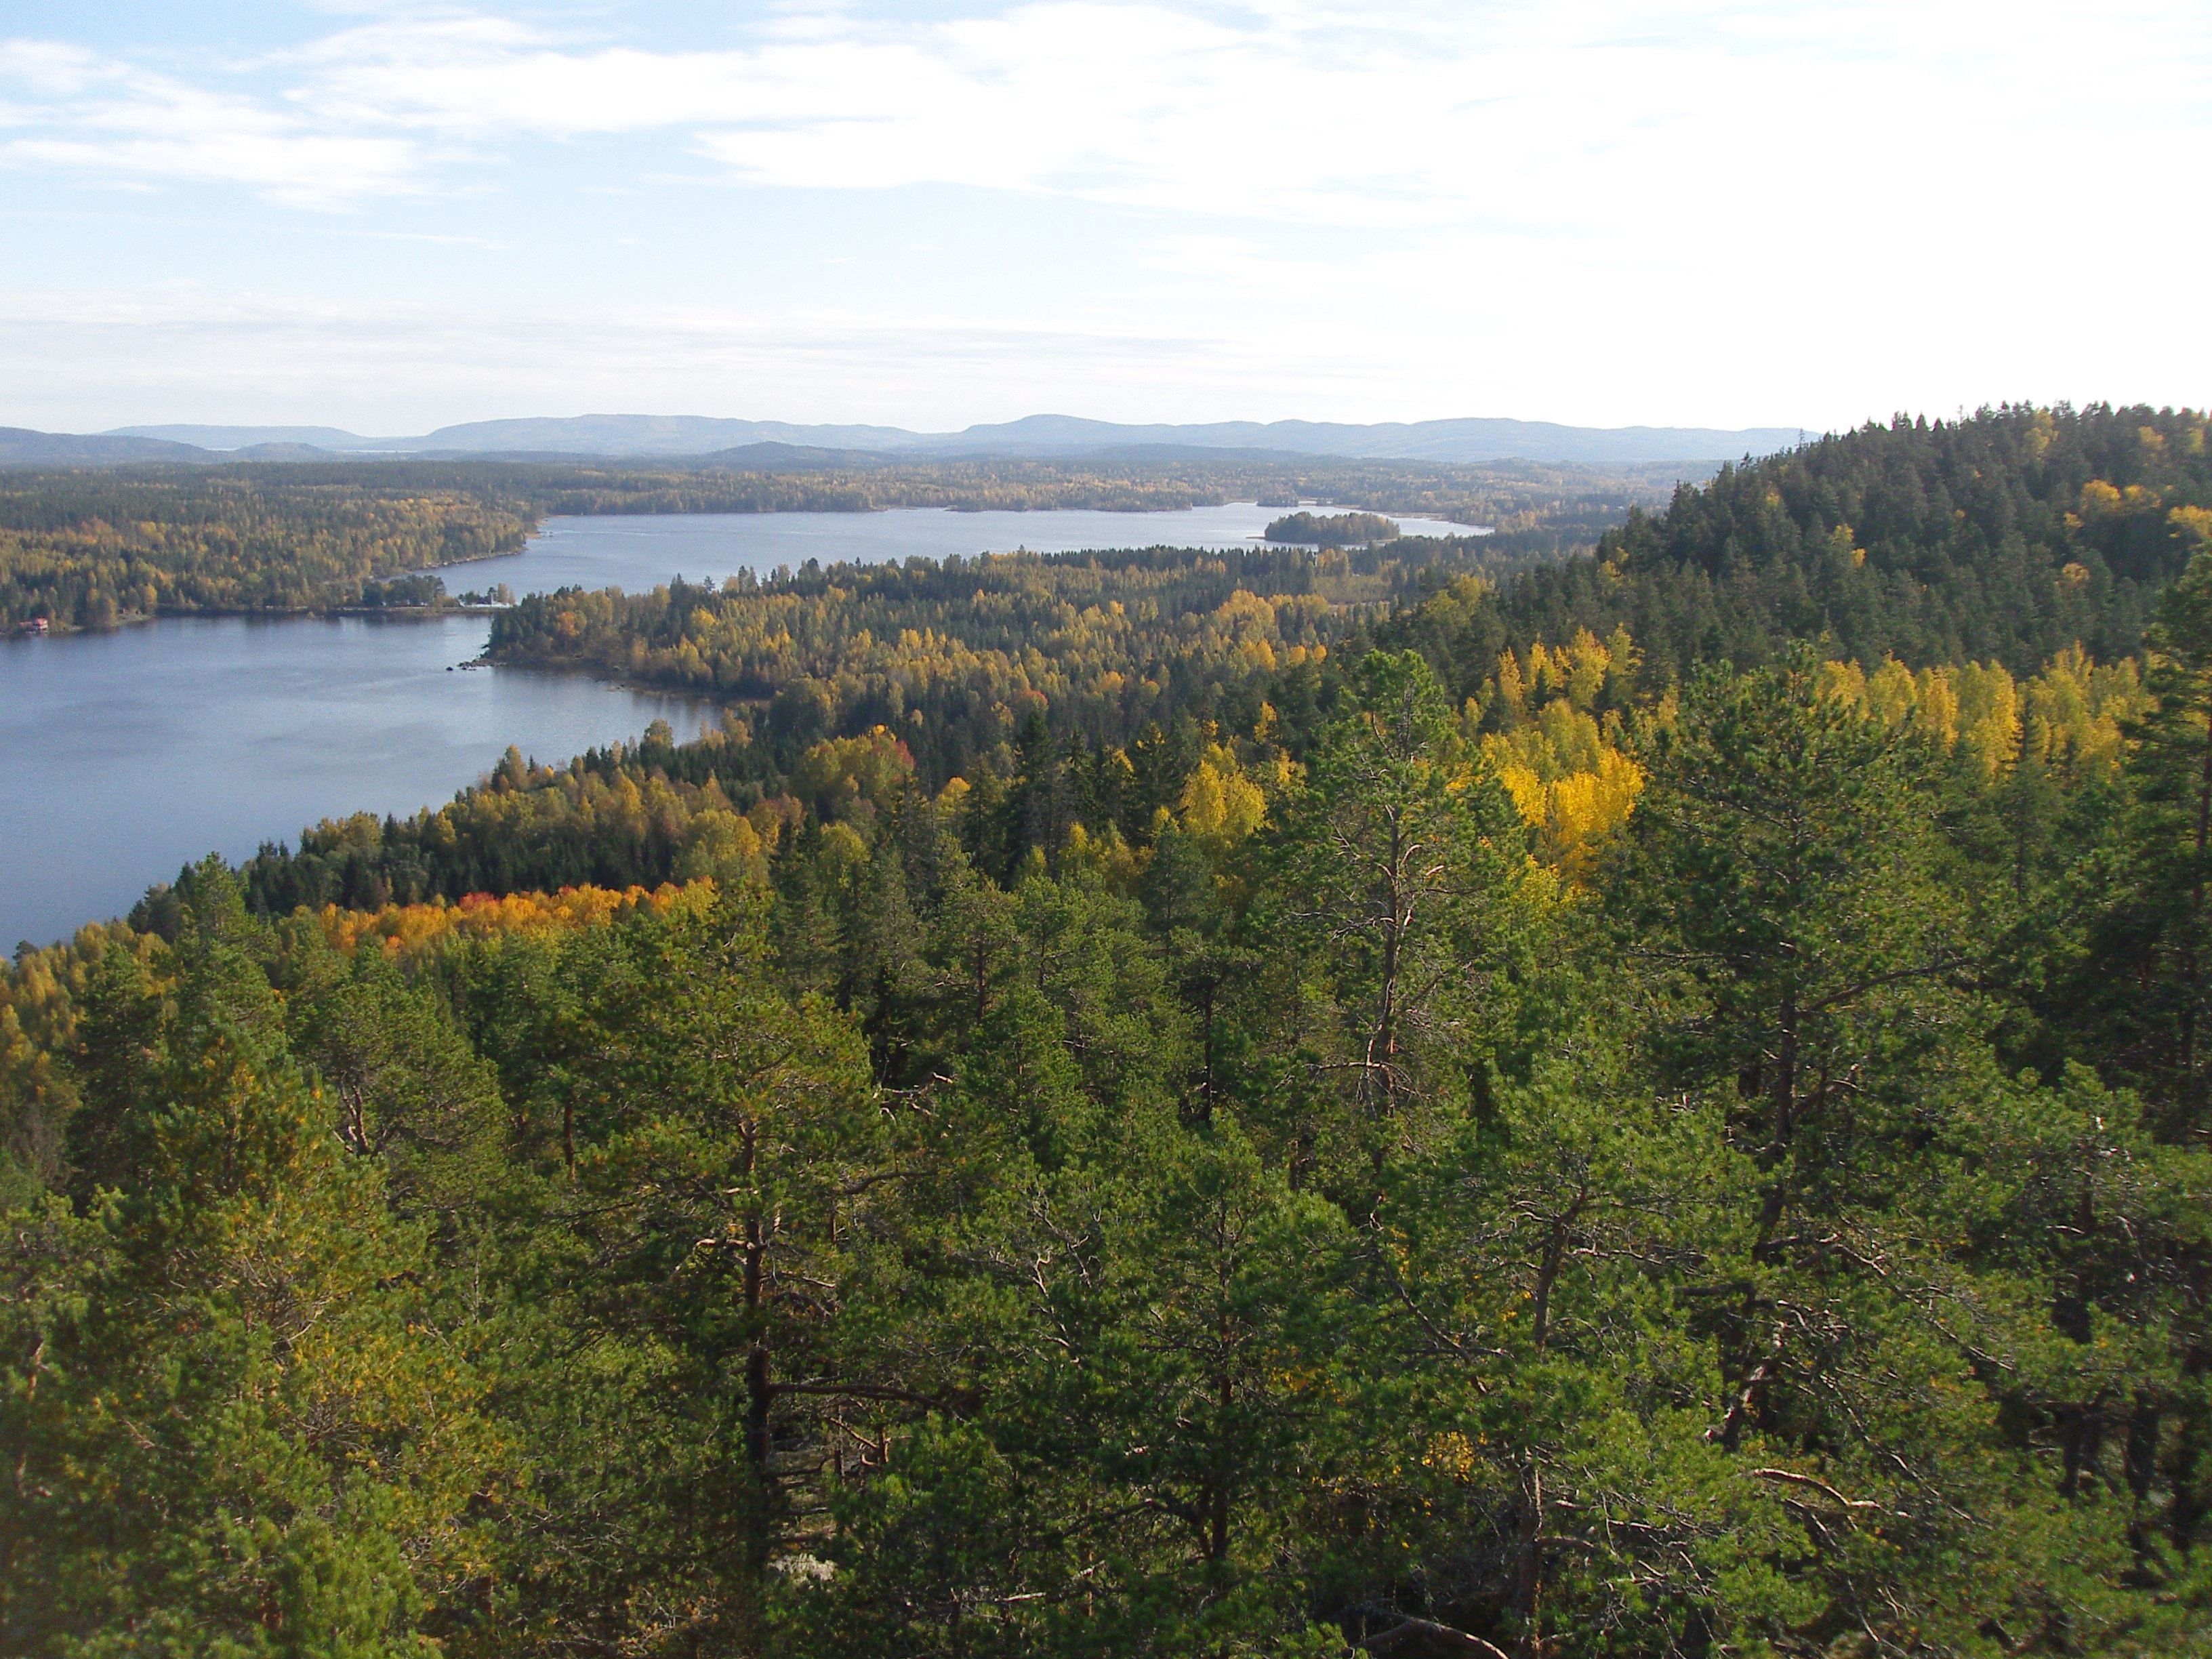 The nature reserve of Tjuvberget